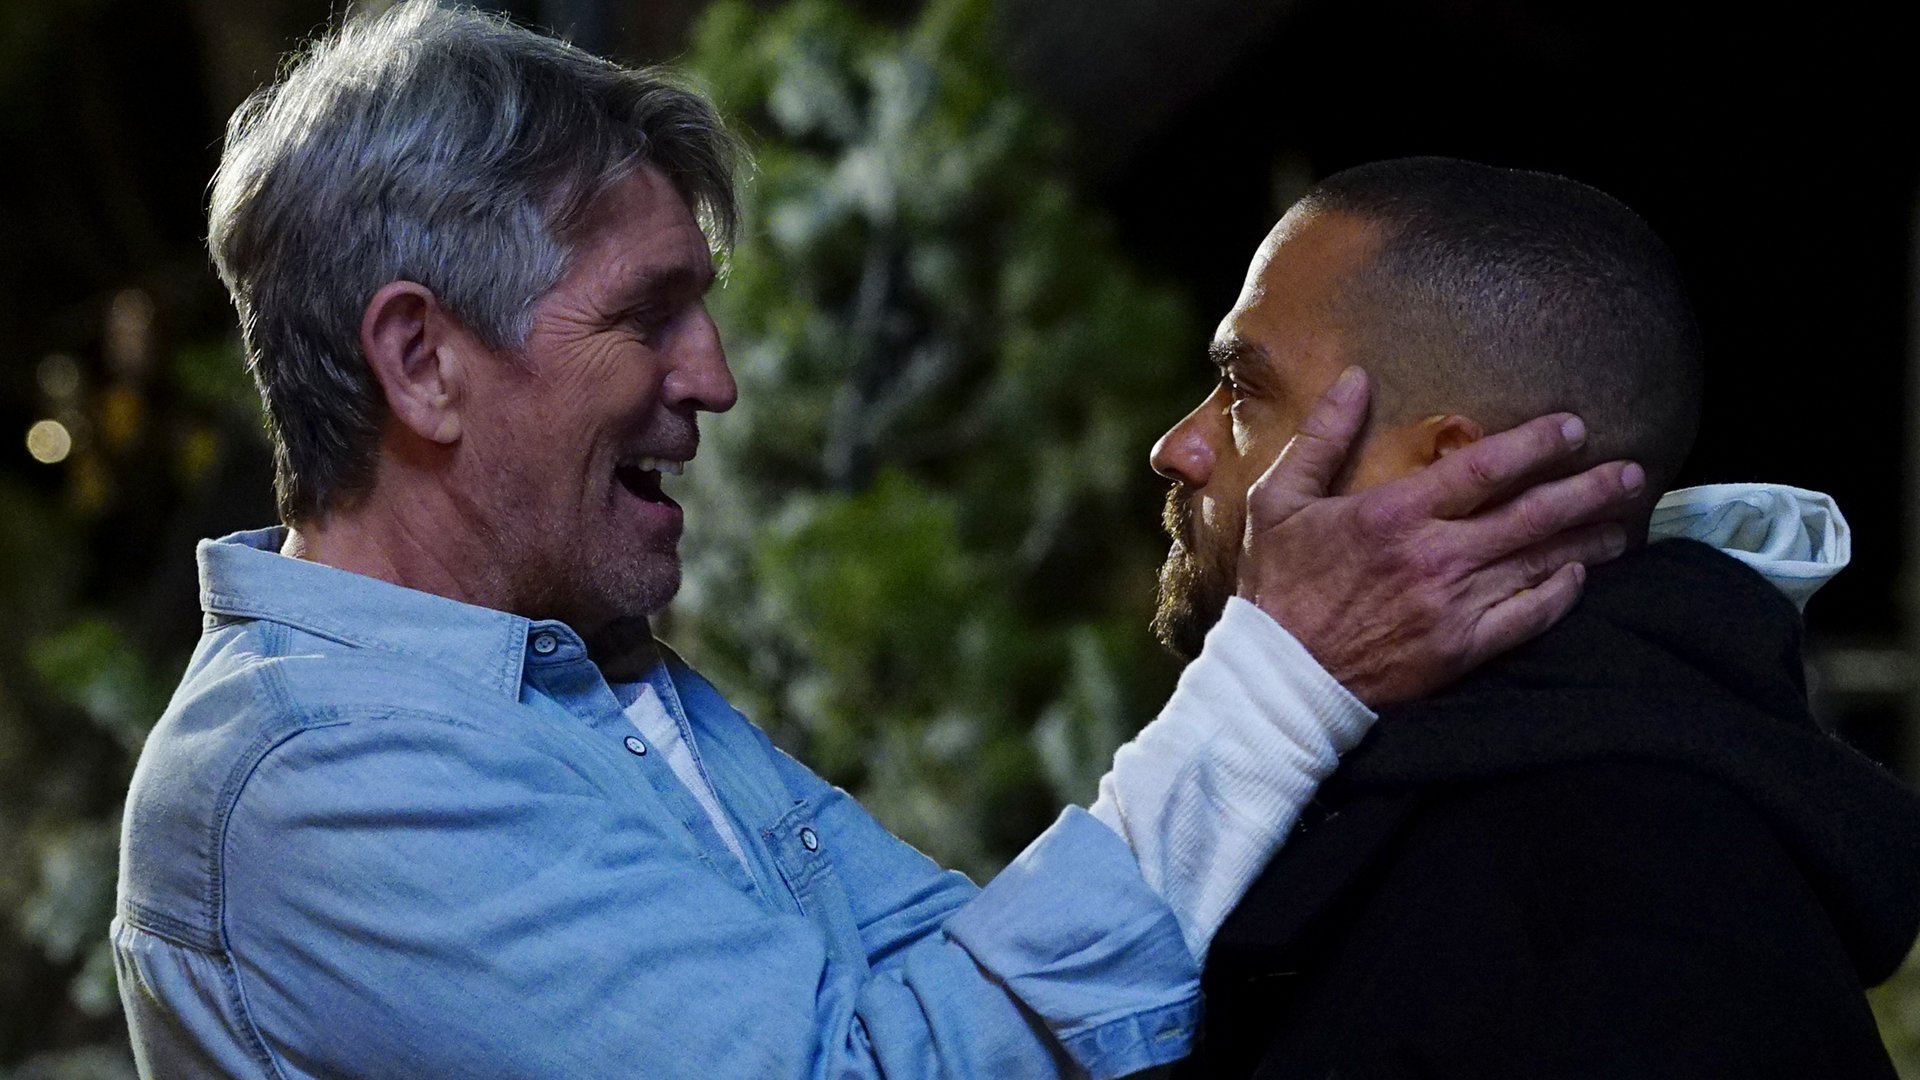 Eric Roberts as Robert Avery holding the face of Jesse Williams as Jackson Avery in ‘Grey’s Anatomy’ Season 13 Episode 16